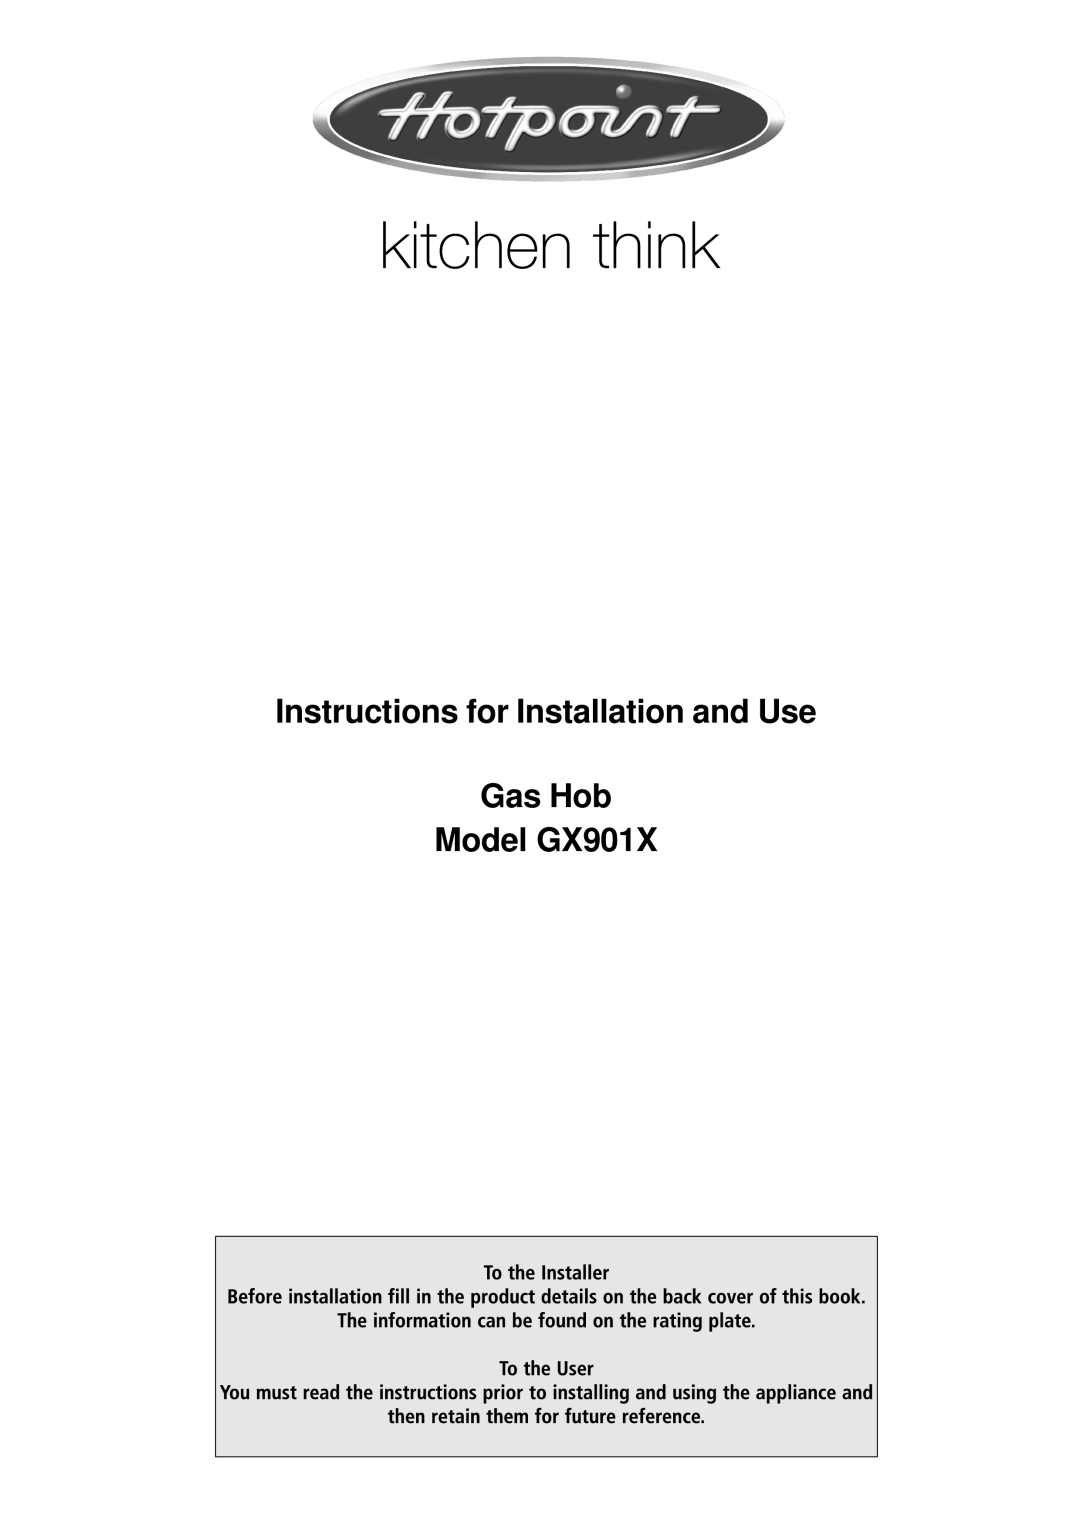 Hotpoint manual Instructions for Installation and Use, Gas Hob Model GX901X 